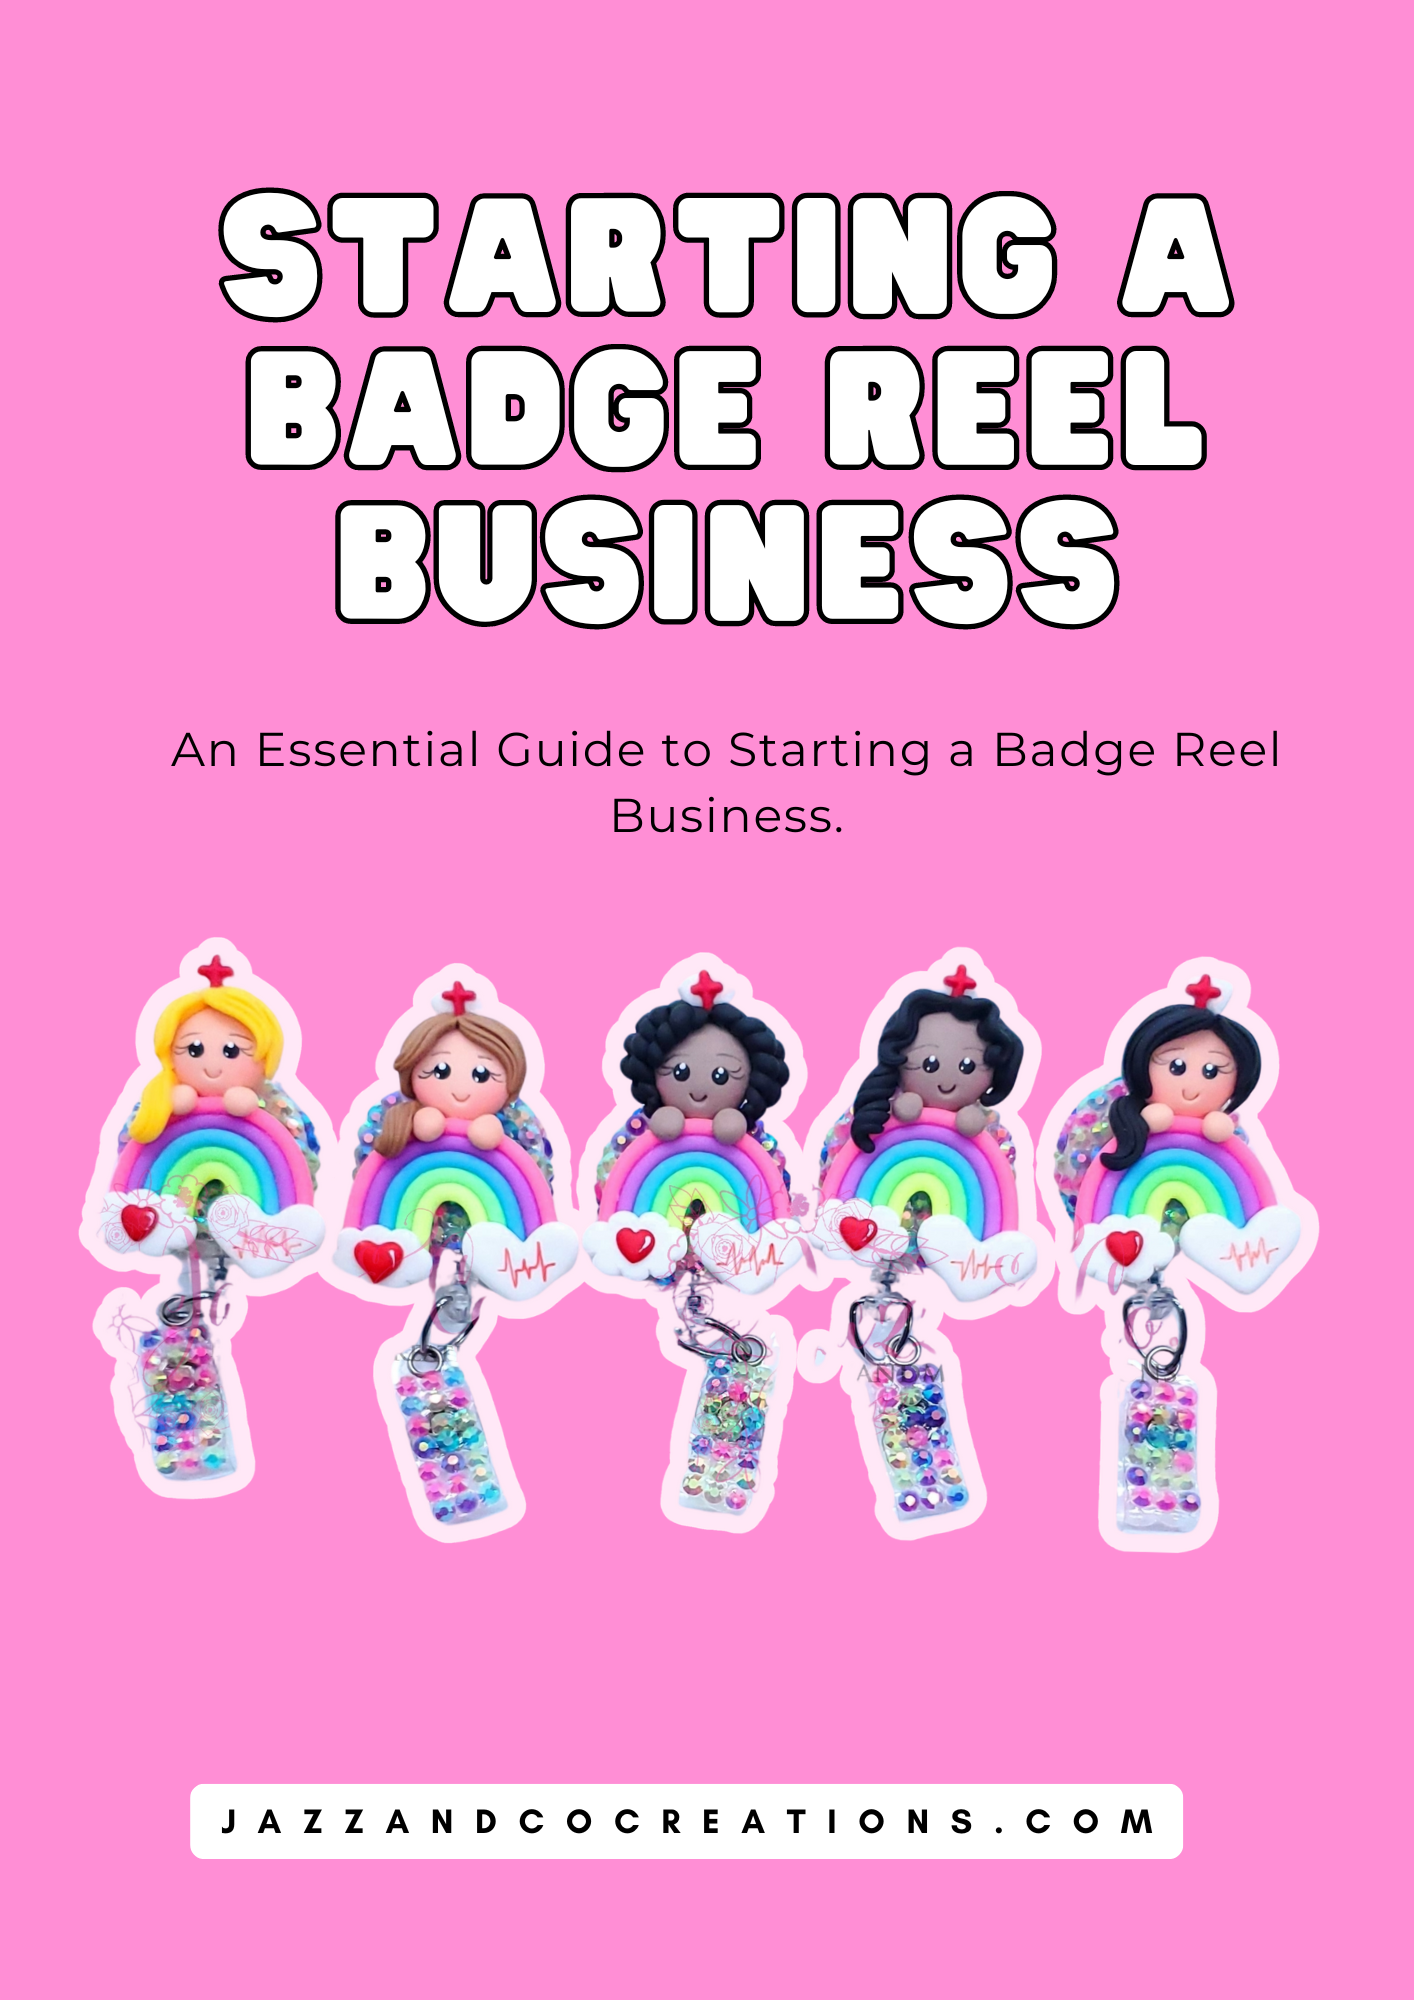 Starting A Badge Reel Business for Beginners Guide